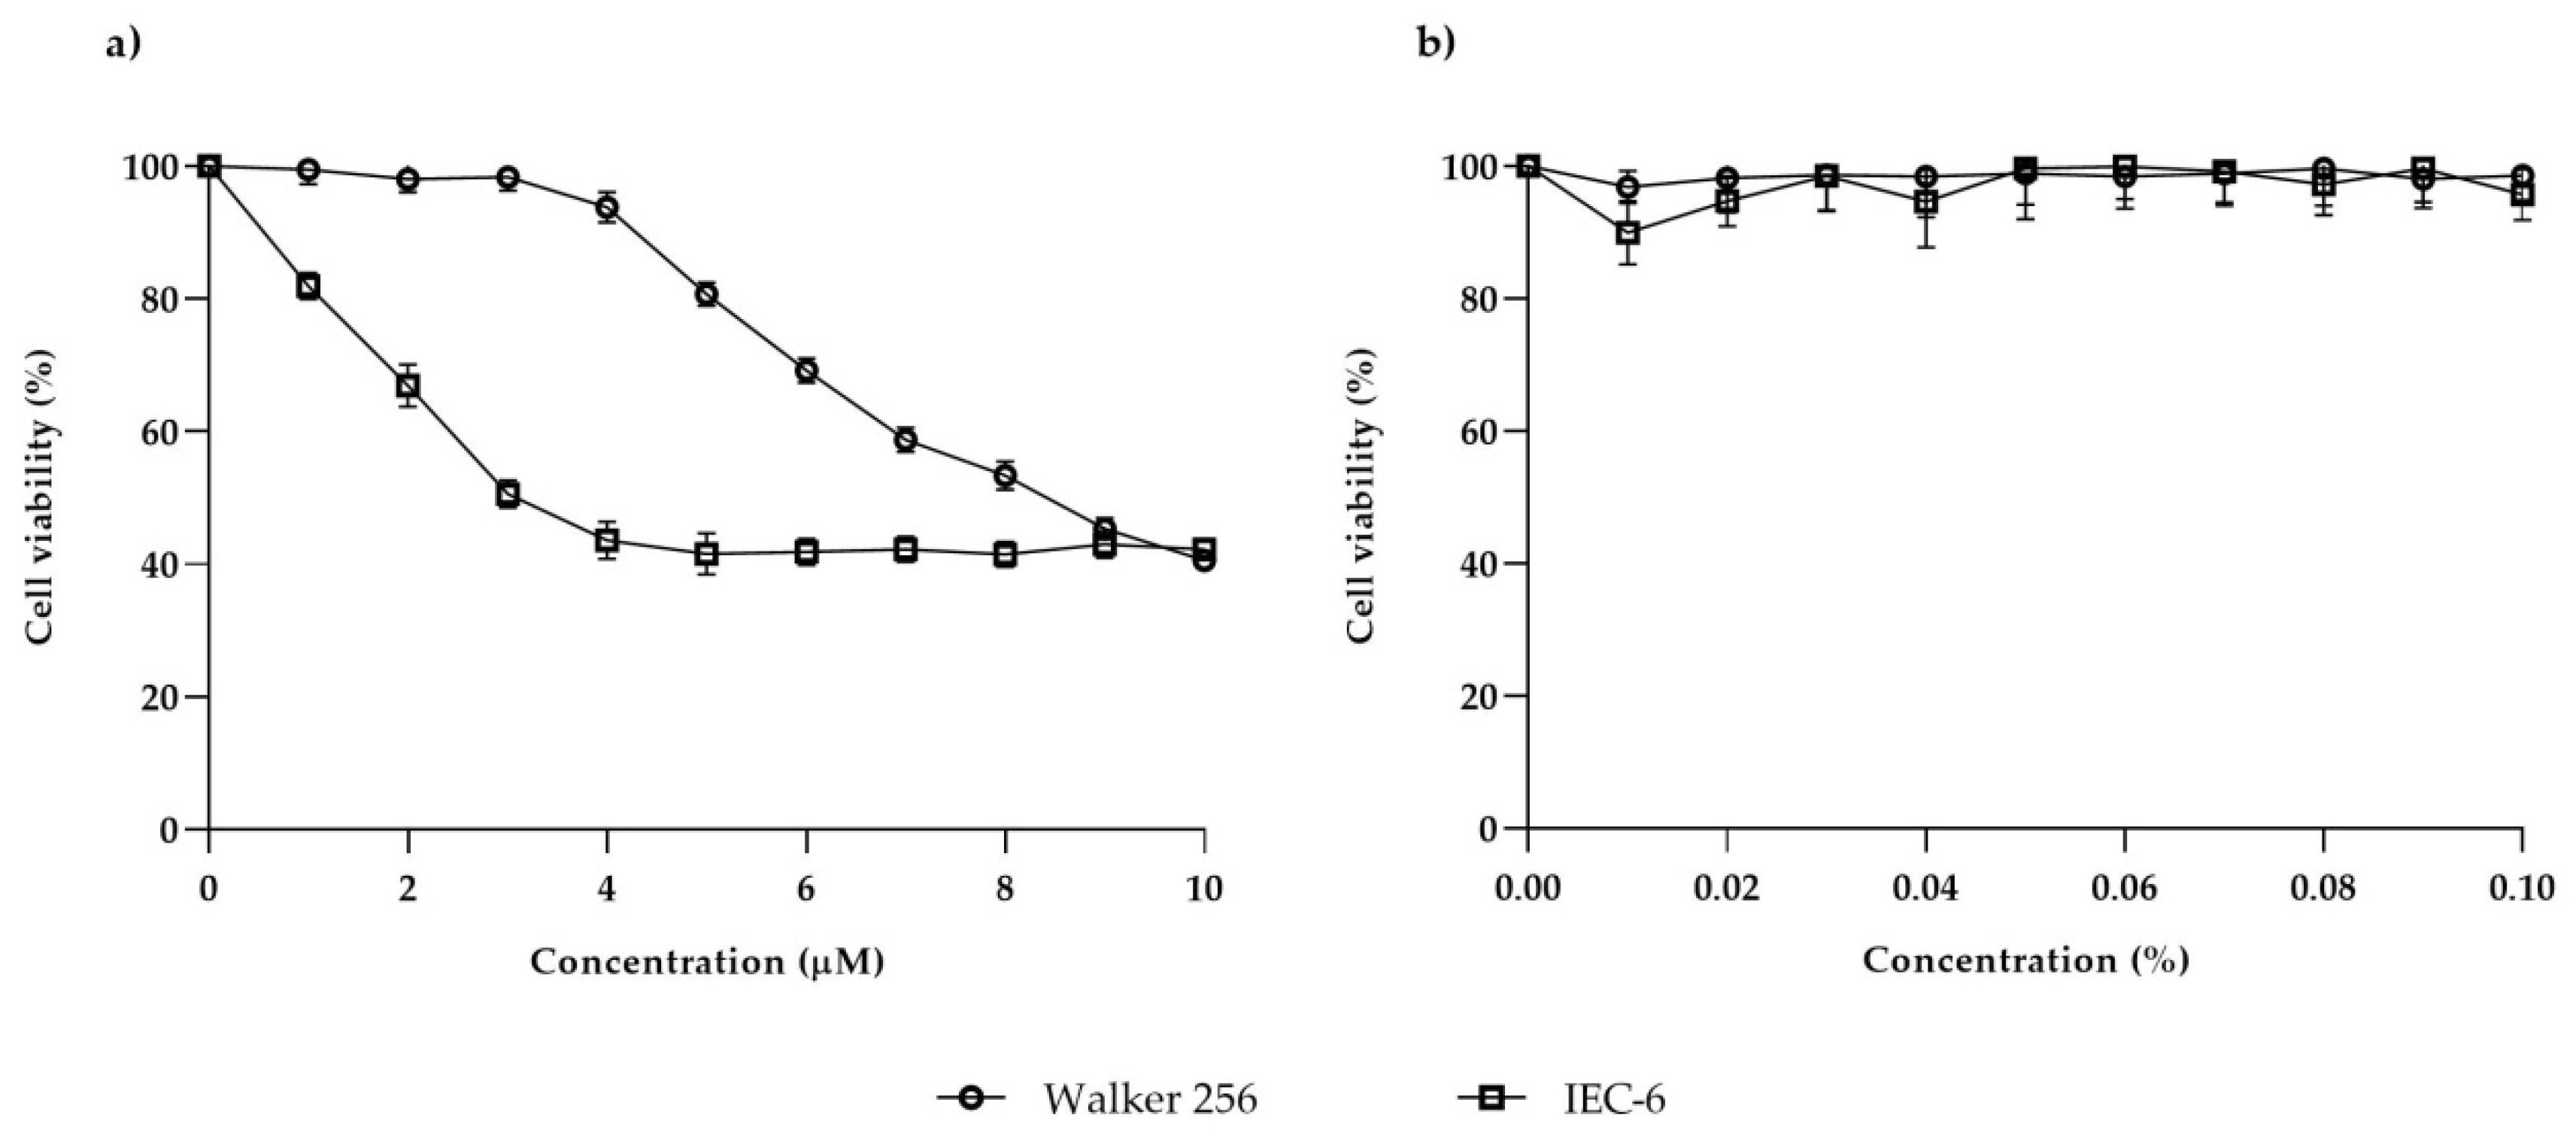 Biomedicines | Free Full-Text | Cytotoxic Effects of the Dual ErbB Tyrosine  Kinase Inhibitor, Lapatinib, on Walker 256 Rat Breast Tumour and IEC-6 Rat  Normal Small Intestinal Cell Lines | HTML